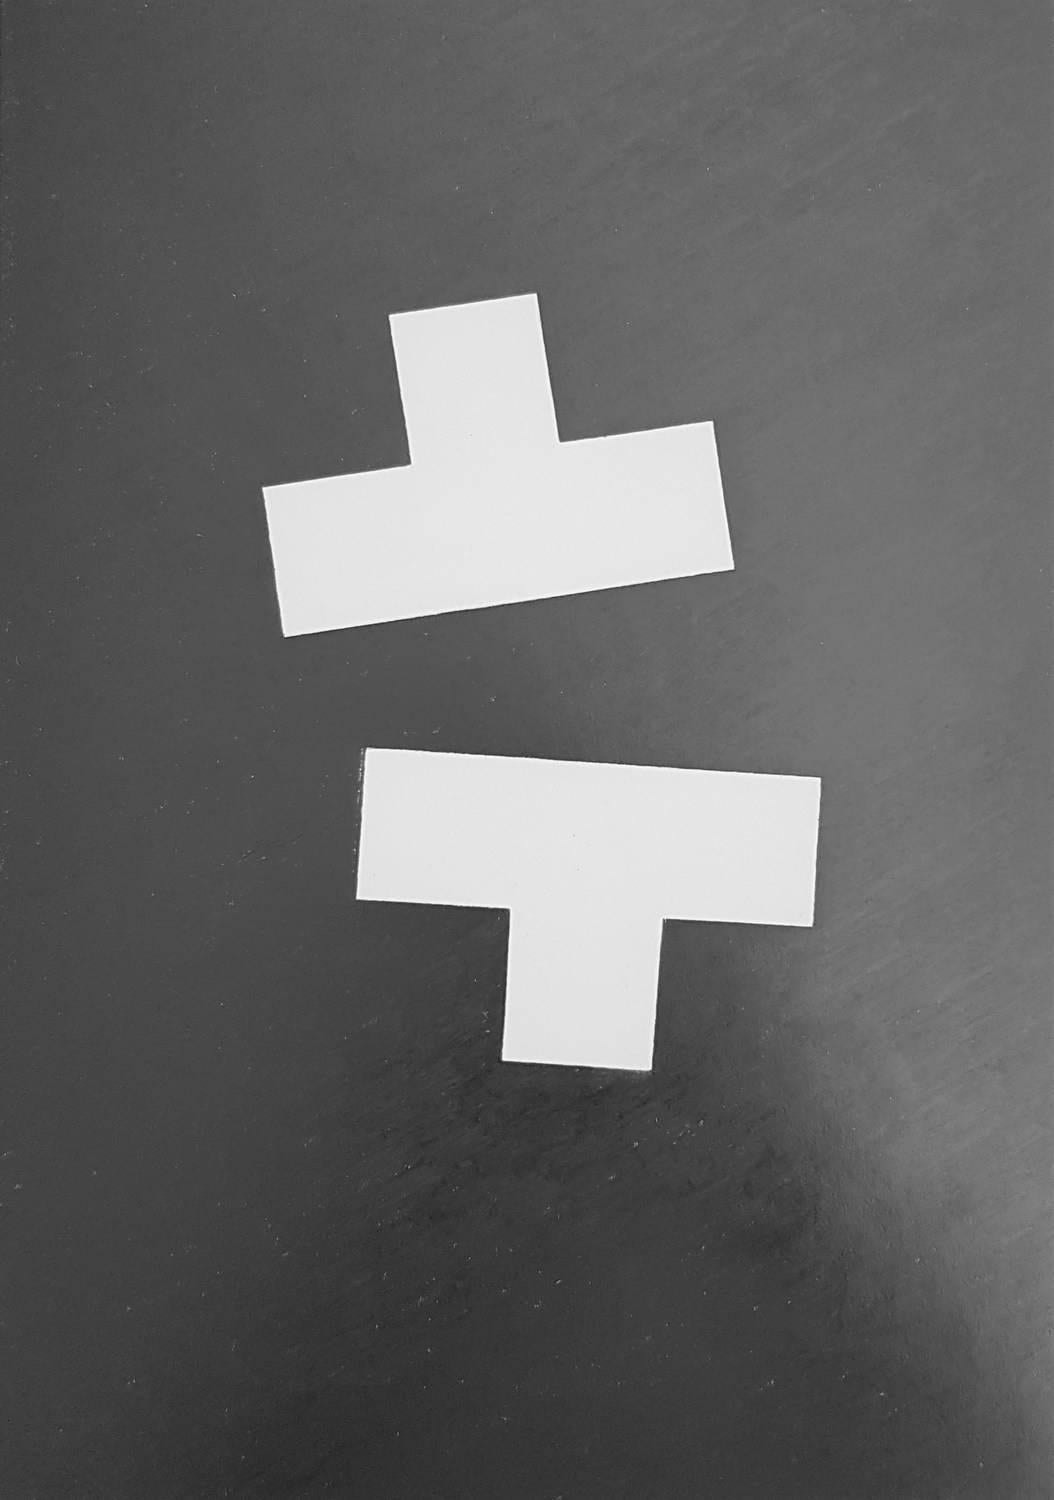  Geometric Composition (Minimalism, Constructivism) - Art by Hannes Forster